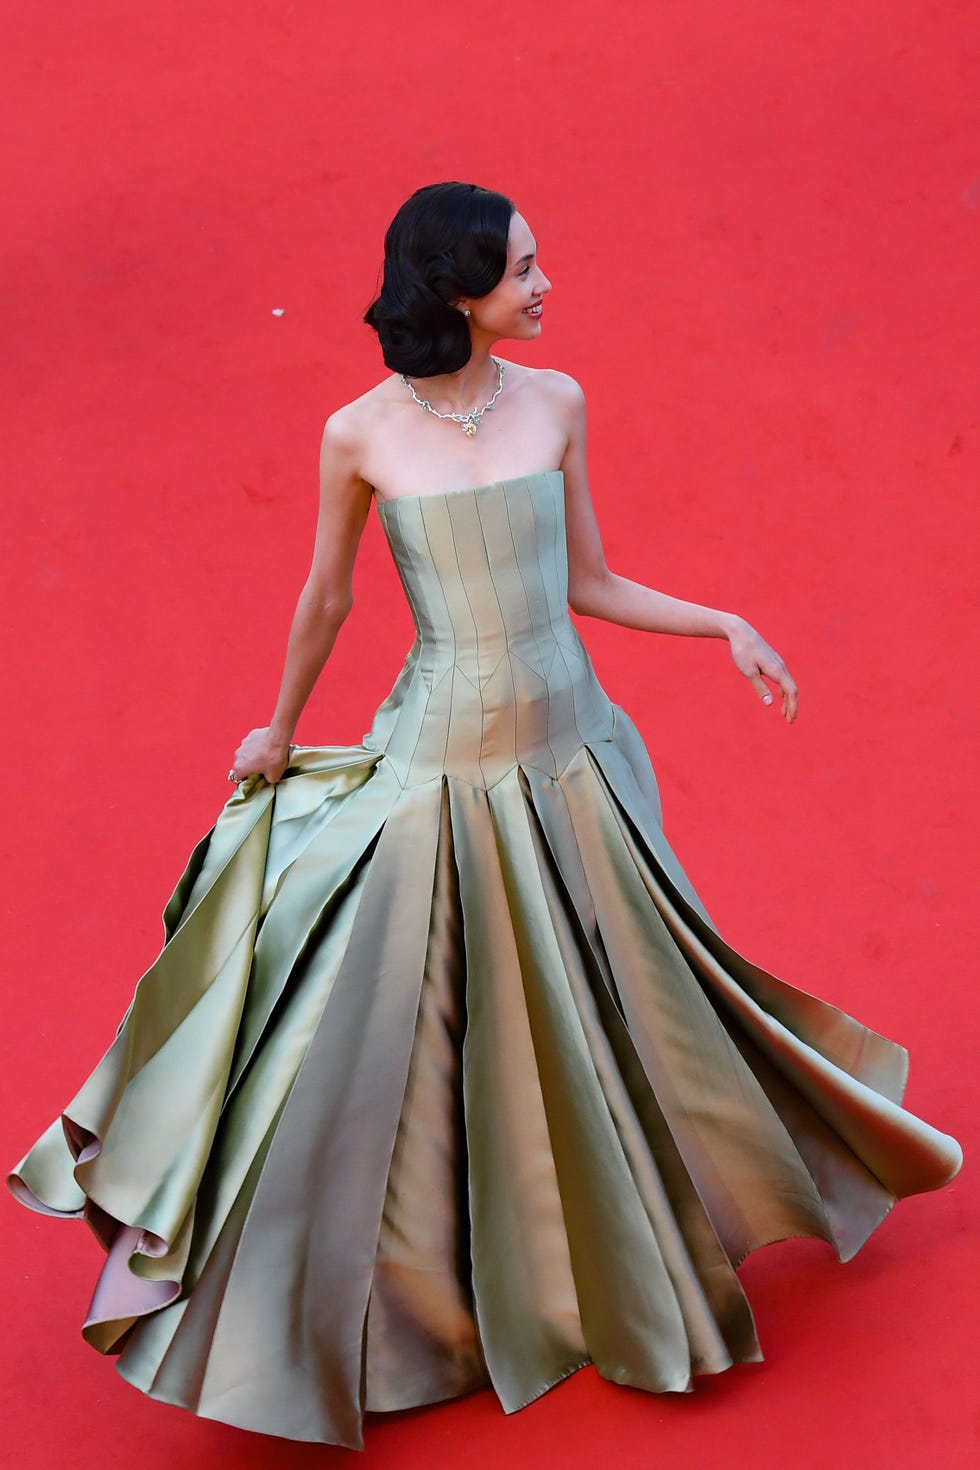 Best Cannes Red Carpet Dresses 2019 - Photos of Fashion at 72nd Cannes ...